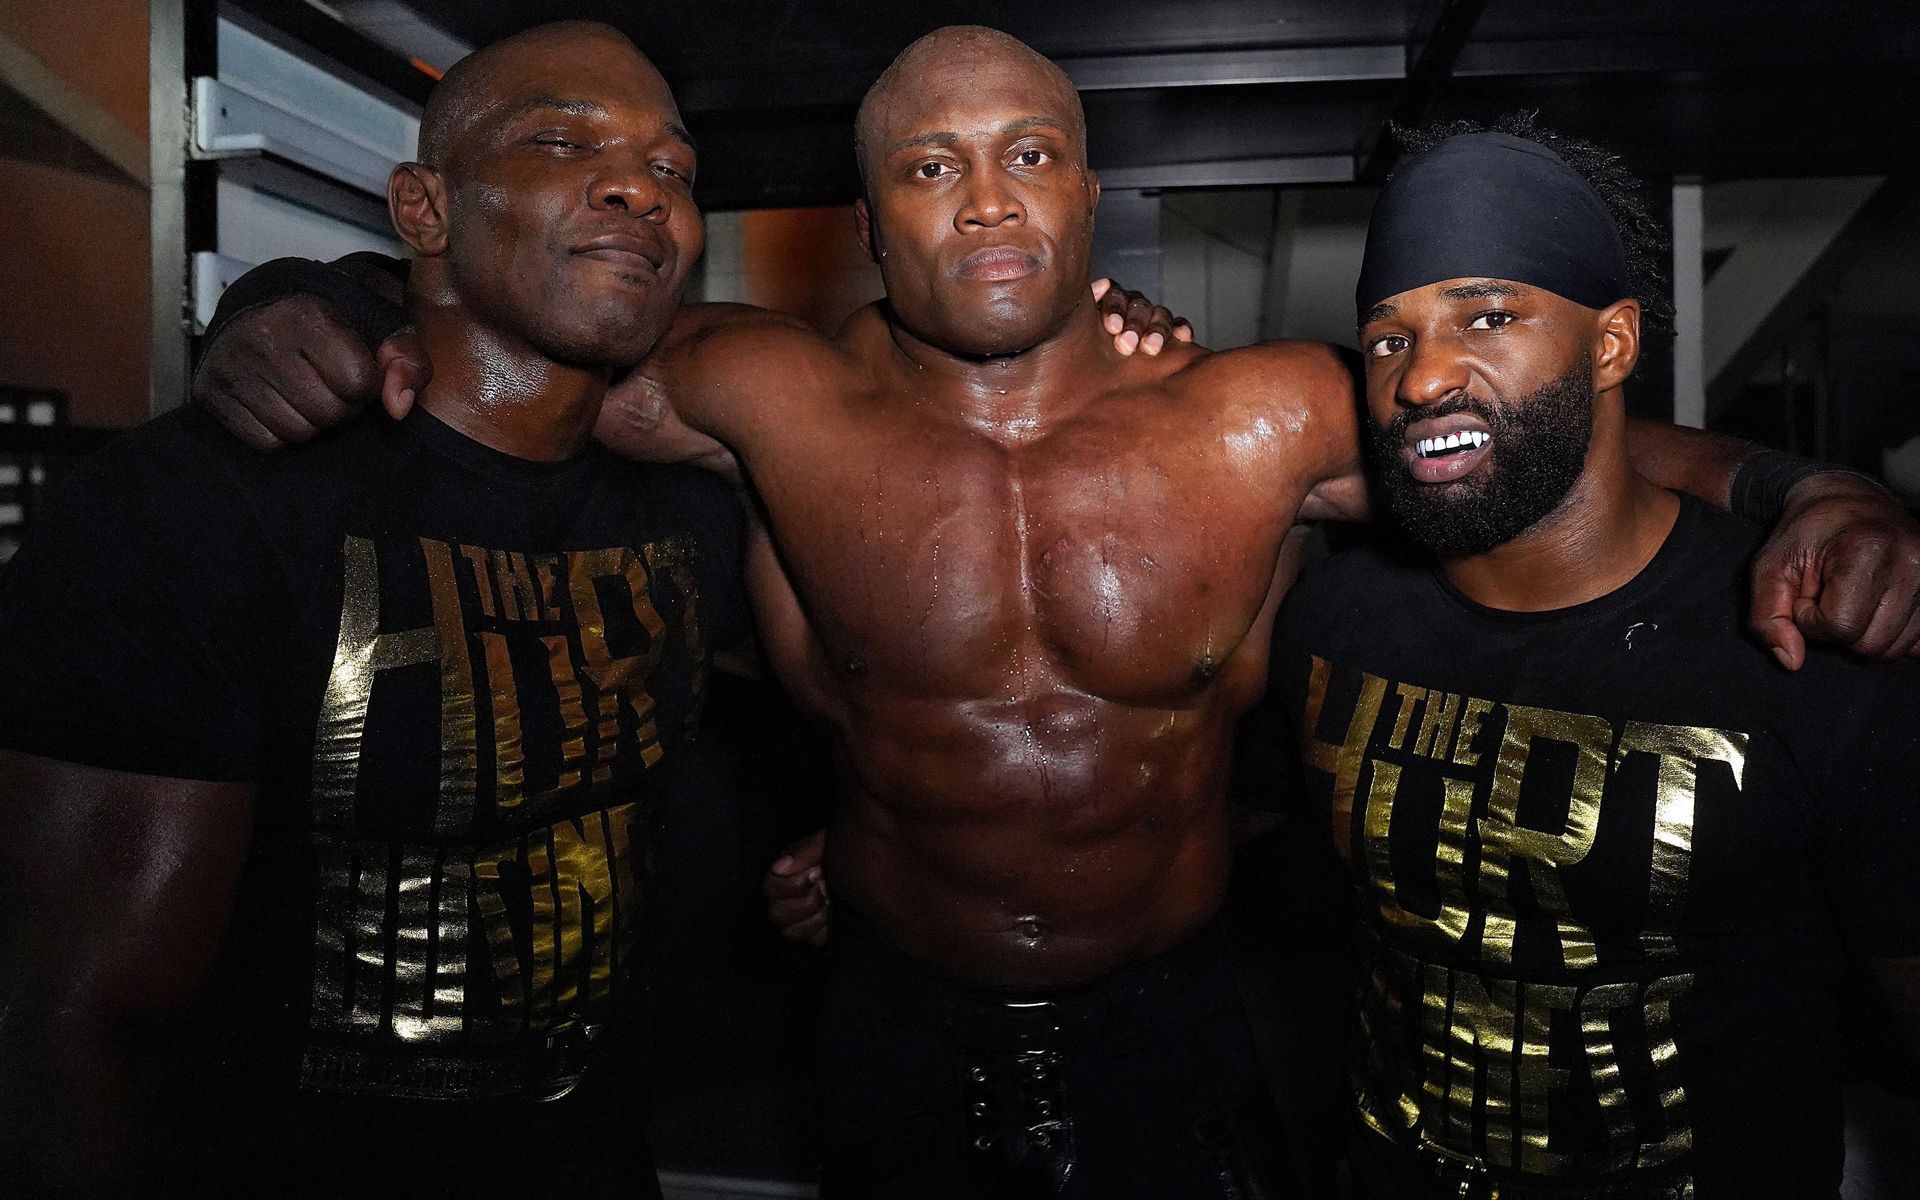 Bobby Lashley is a former member of The Hurt Business